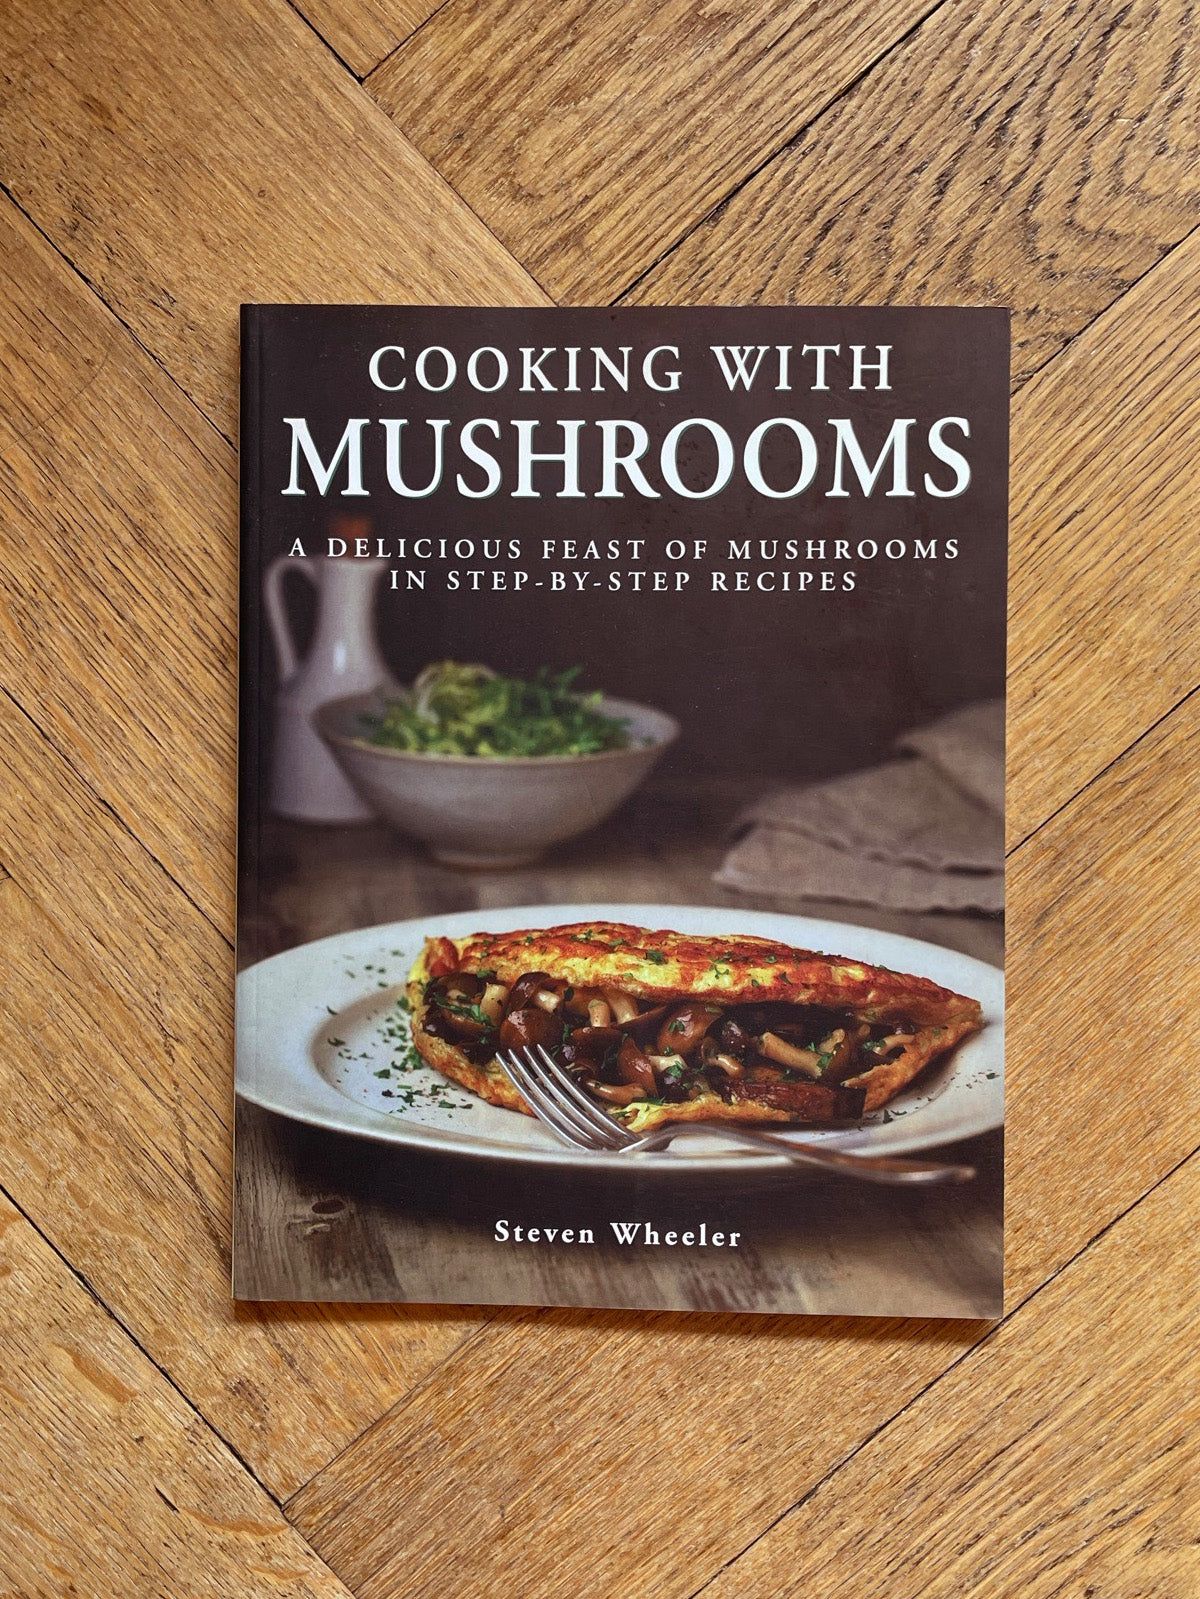 Cookings with Mushrooms by Steven Wheeler